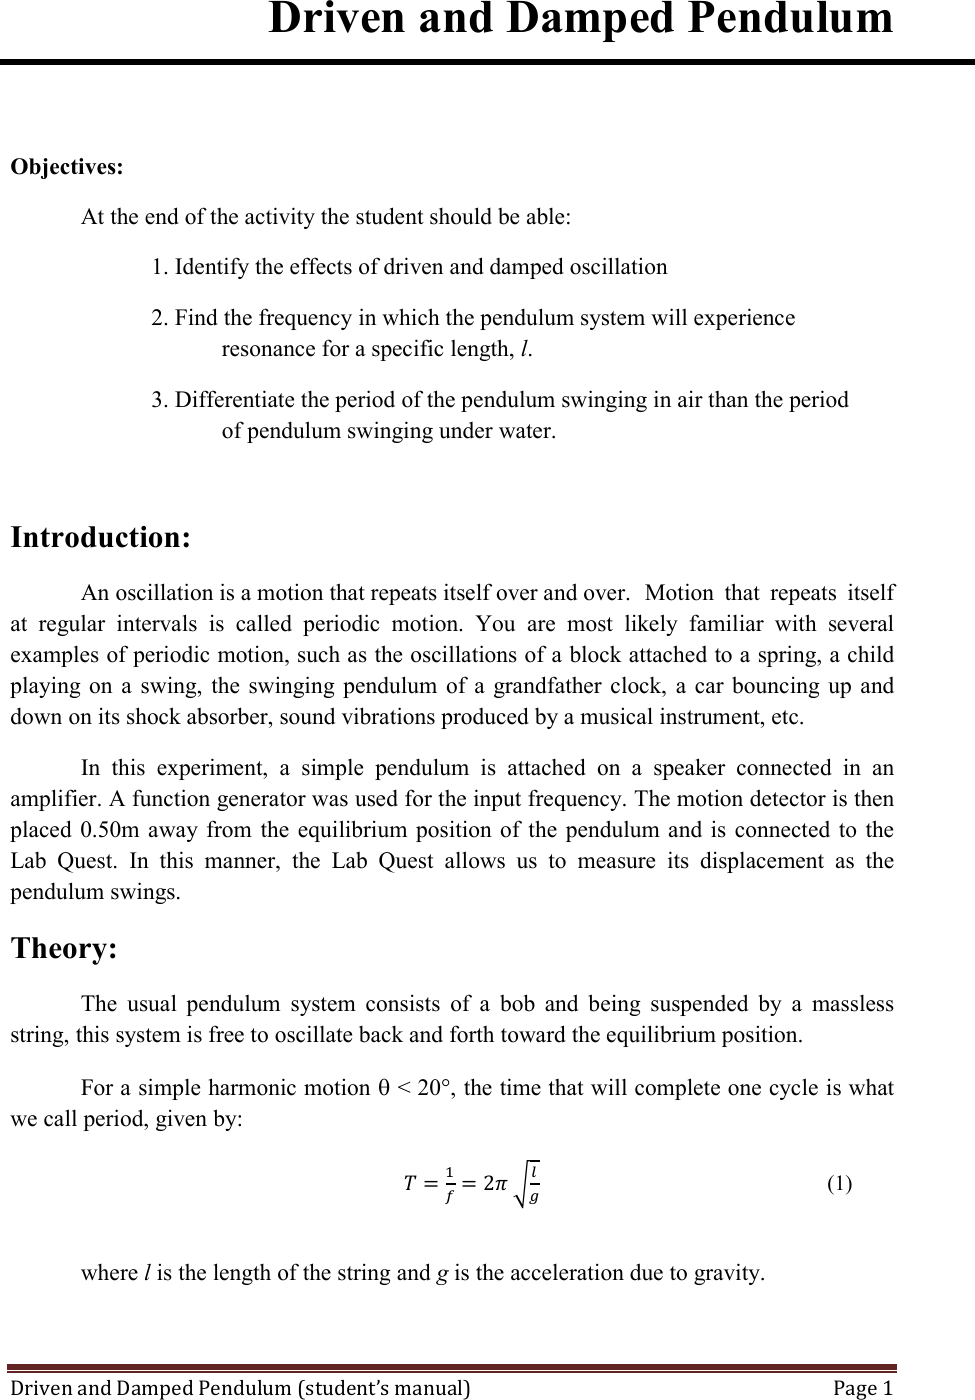 Page 1 of 10 - 01 Driven And Damped Pendulum Experiment Manual